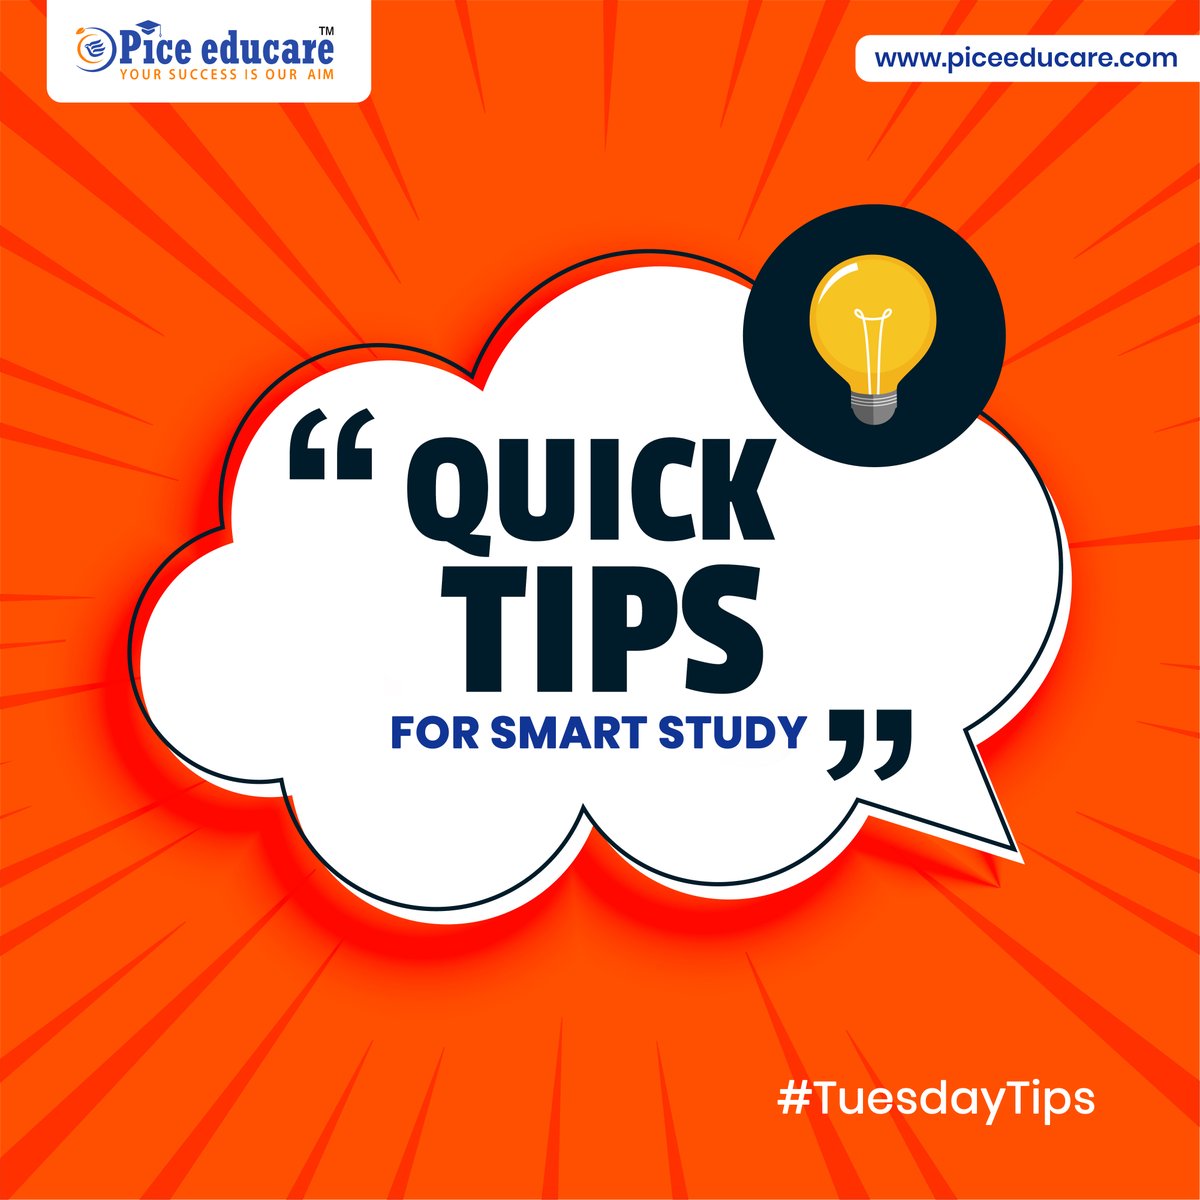 Tuesday Tips! . . . . . . . #TuesdayTips #StudyTips #Students #Education #piceeducare